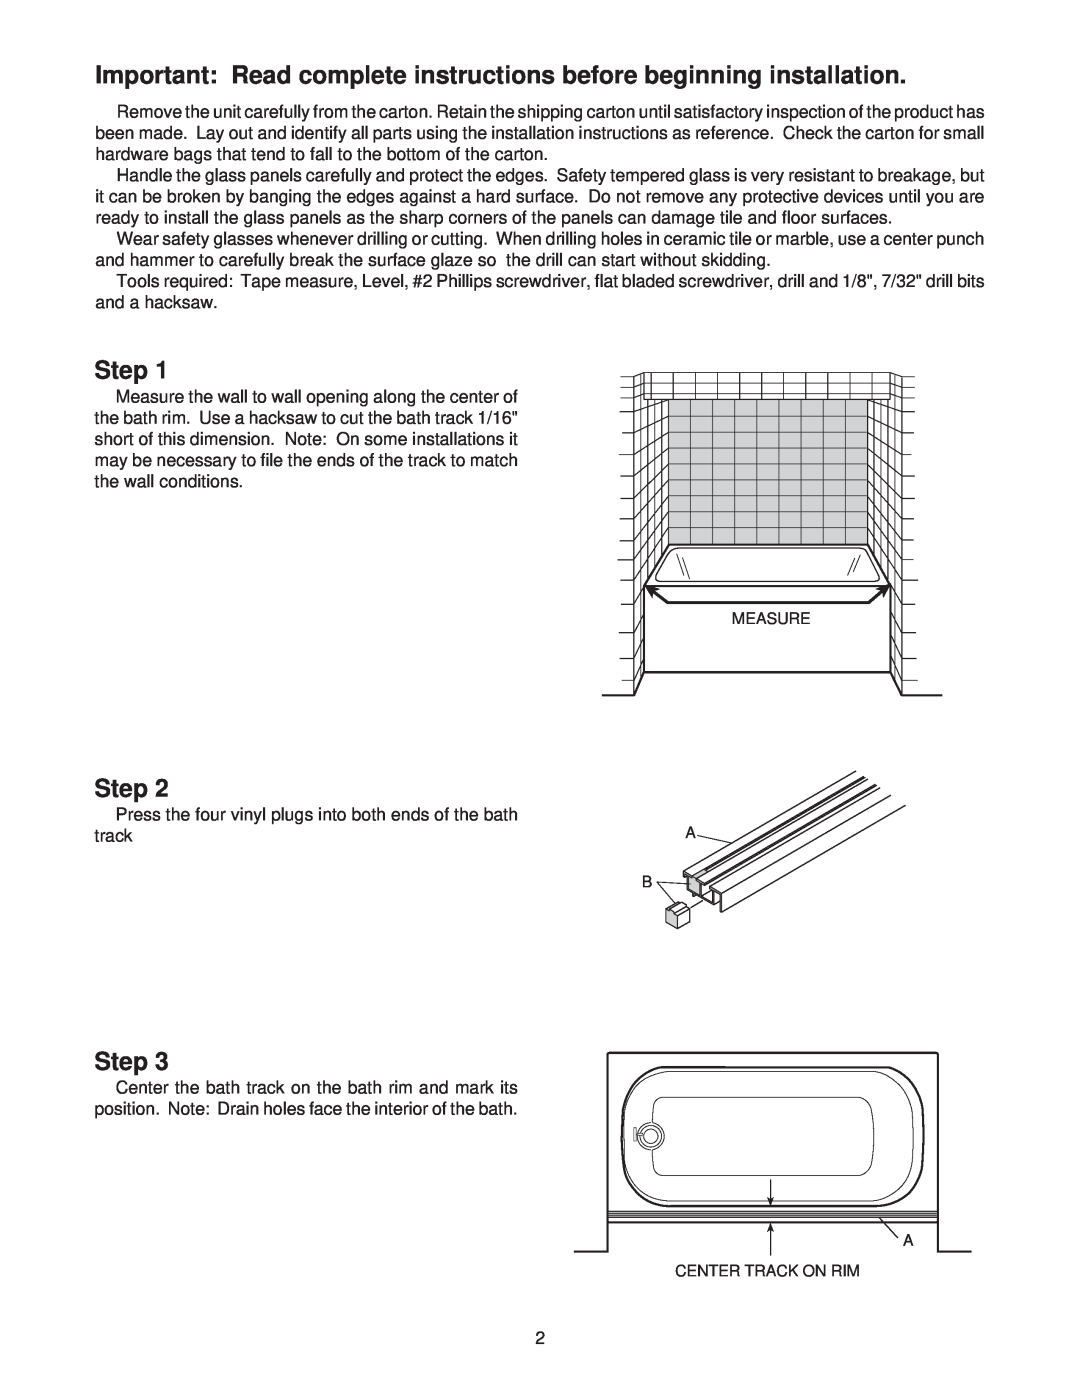 Jacuzzi Steam Enclosure installation instructions Important Read complete instructions before beginning installation, Step 